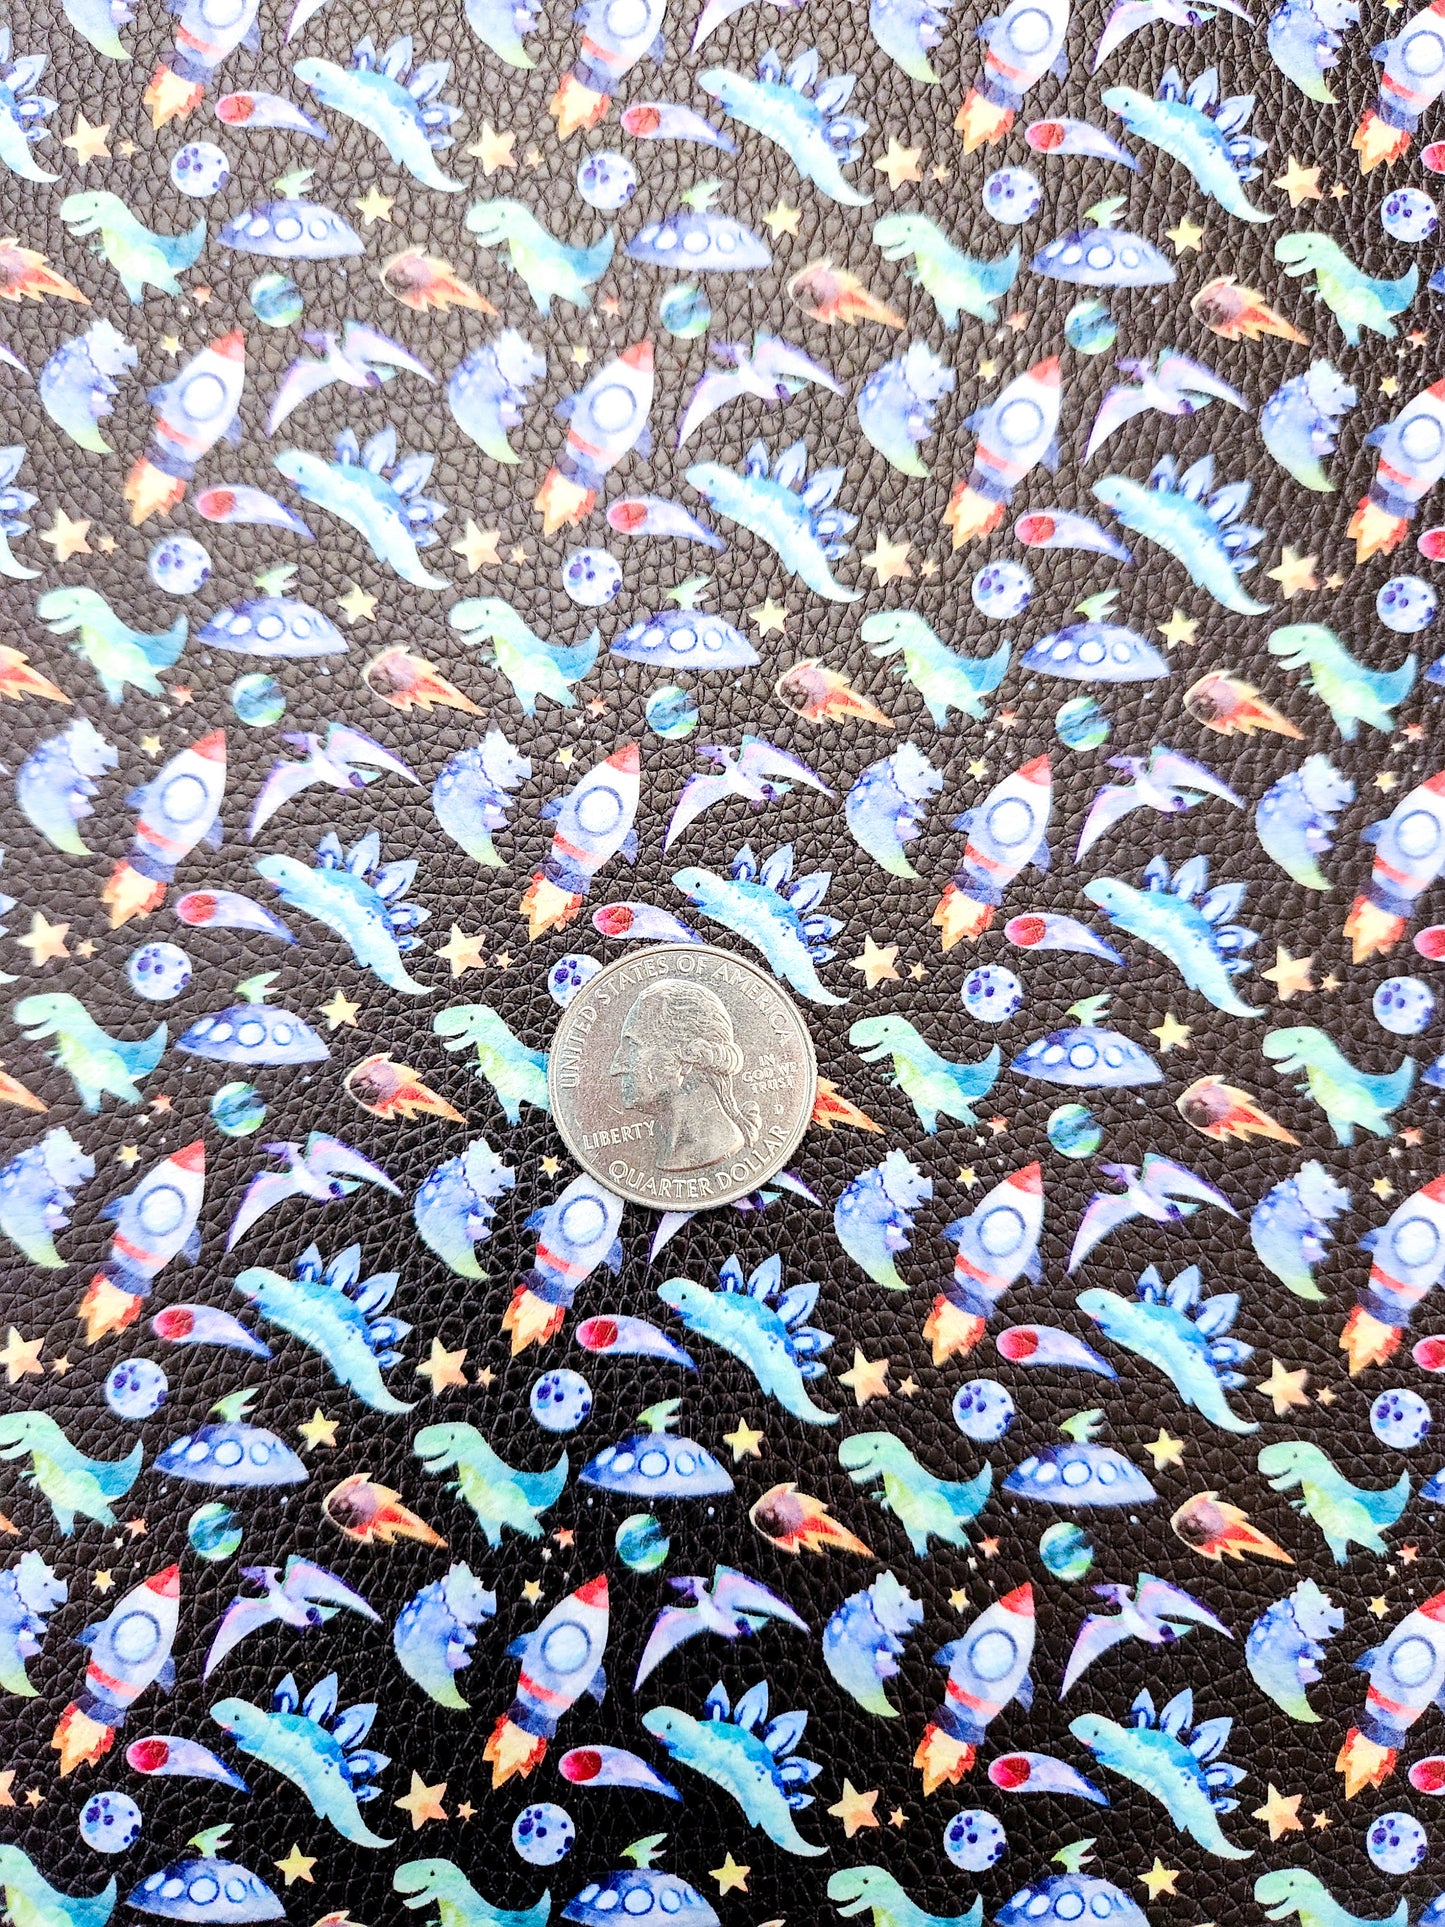 Space Dinos 9x12 faux leather sheet